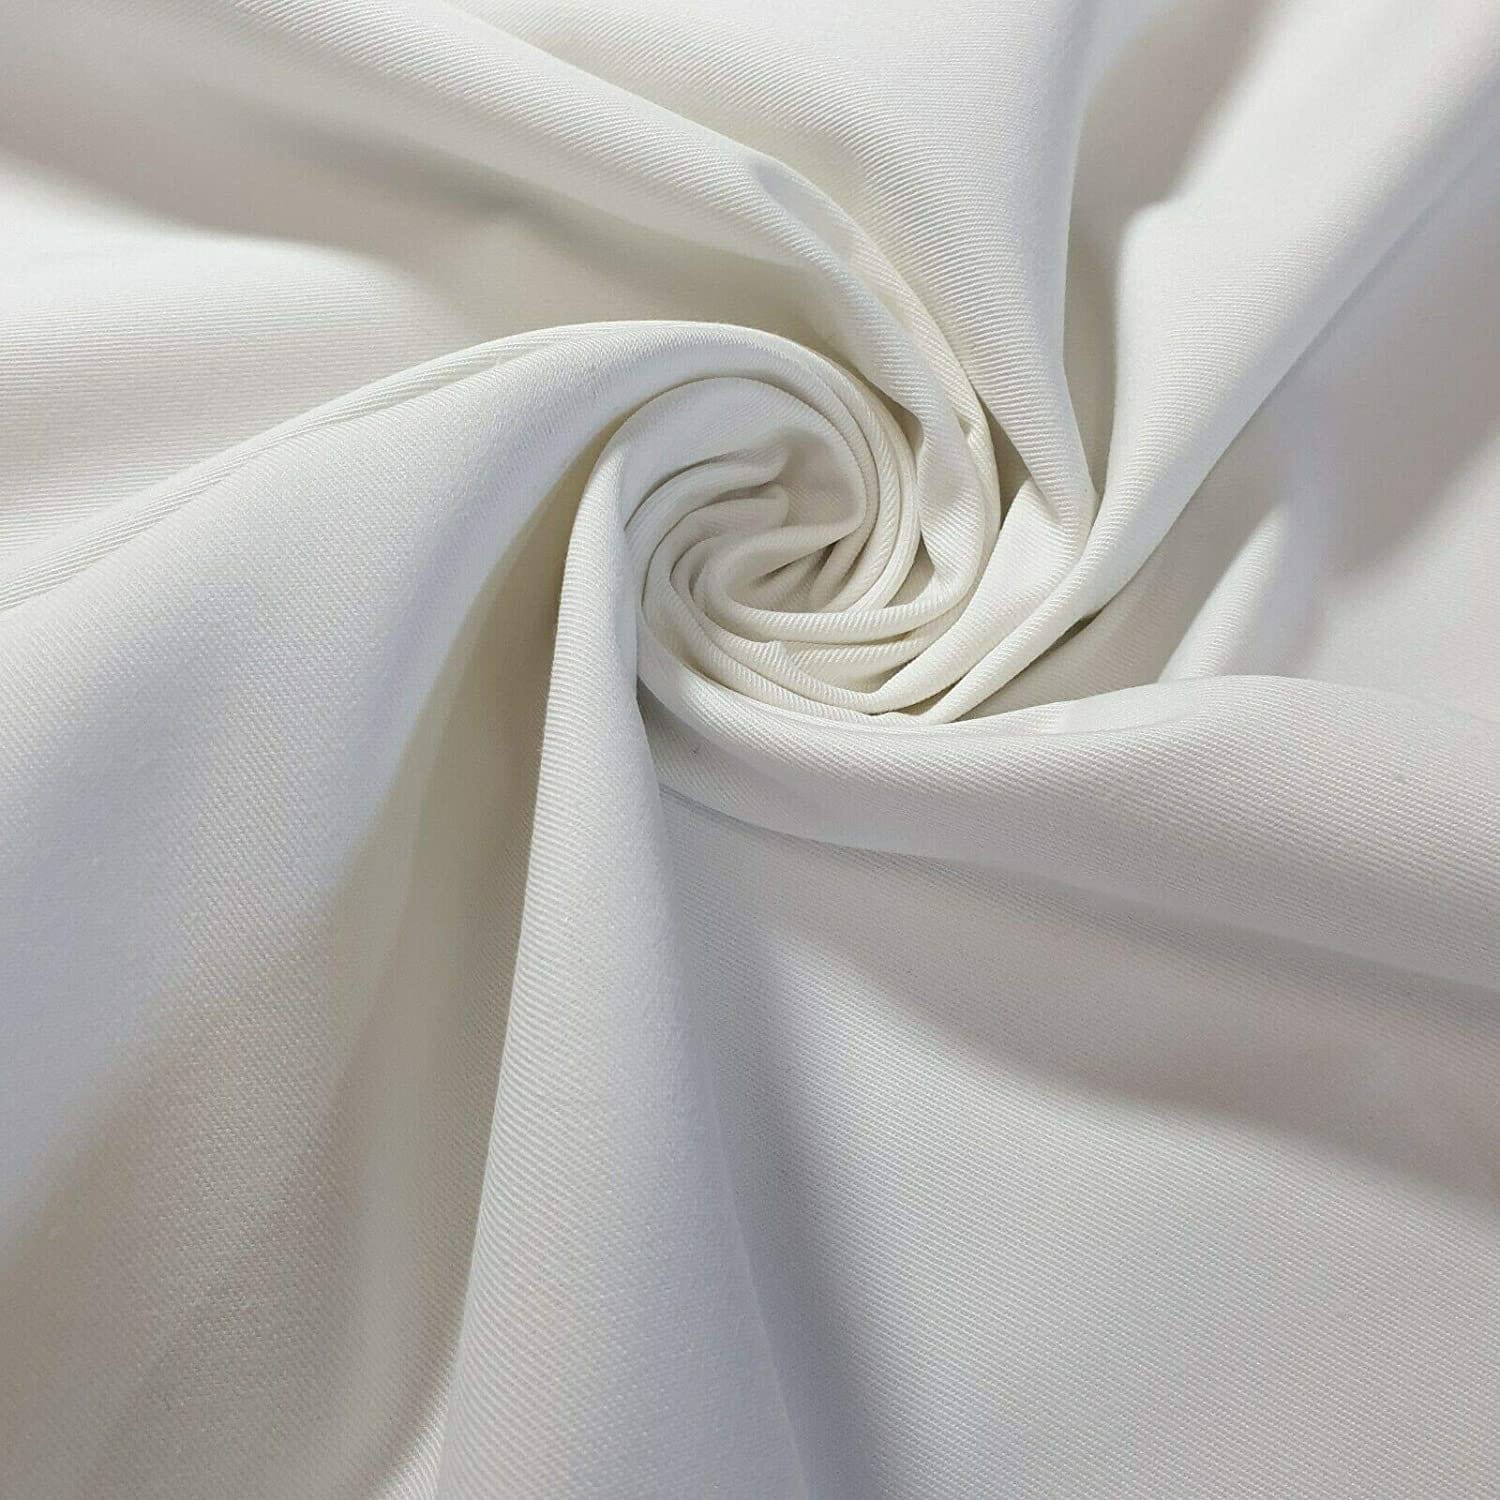 PLAIN Thick WHITE 100% Cotton Drill Workwear Fabric Dress Craft Quilting  Material 150 cm wide